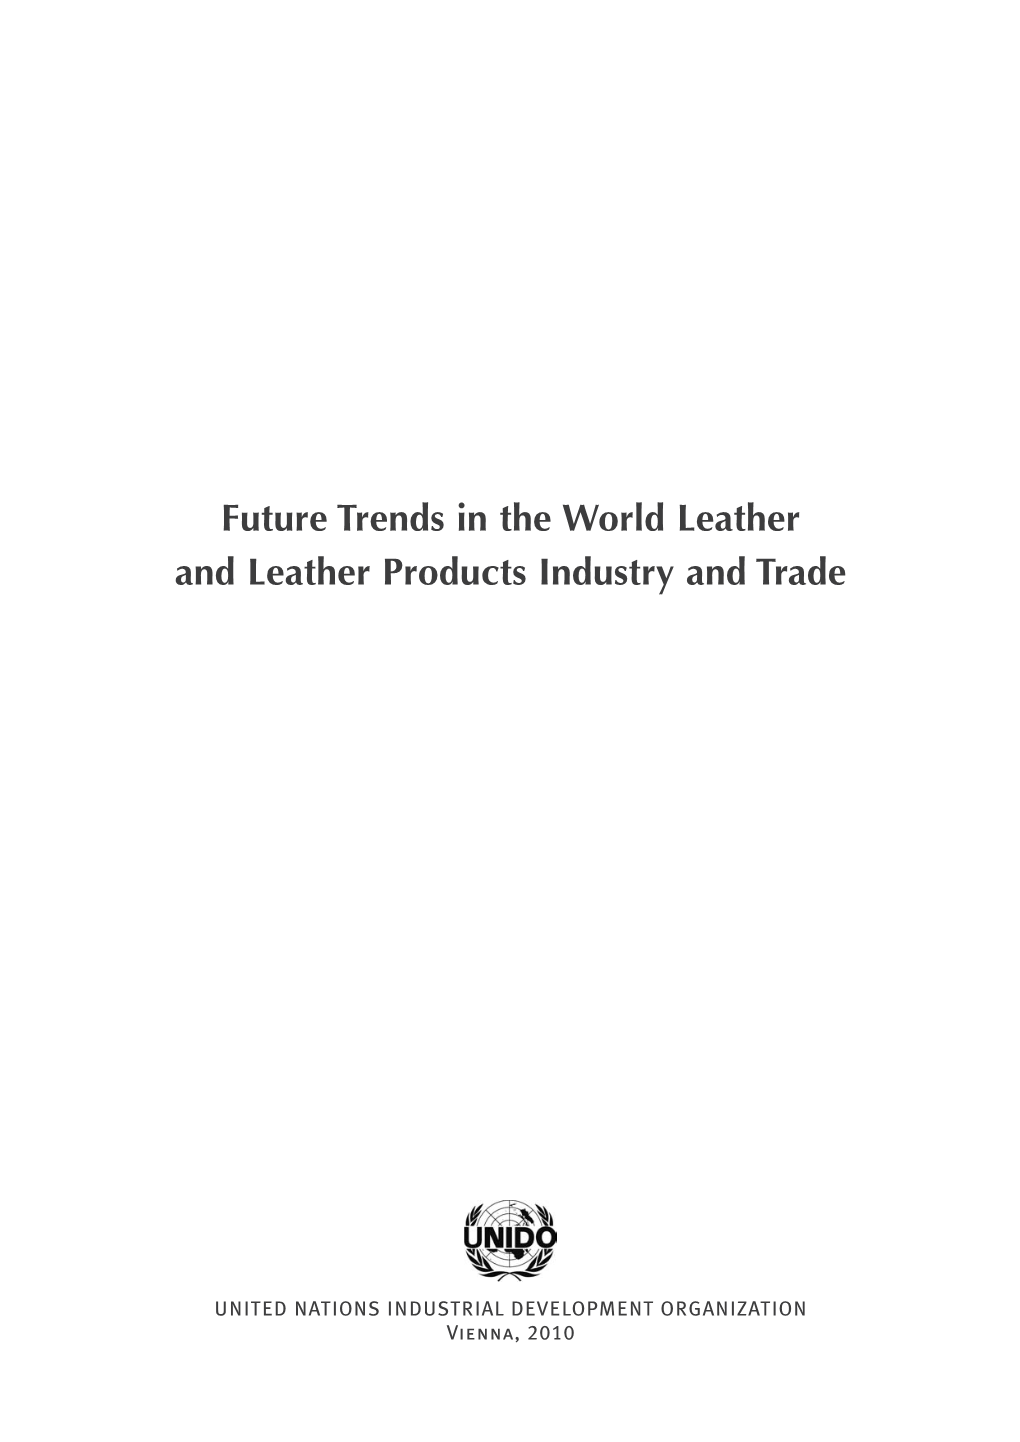 Future Trends in the World Leather and Leather Products Industry and Trade